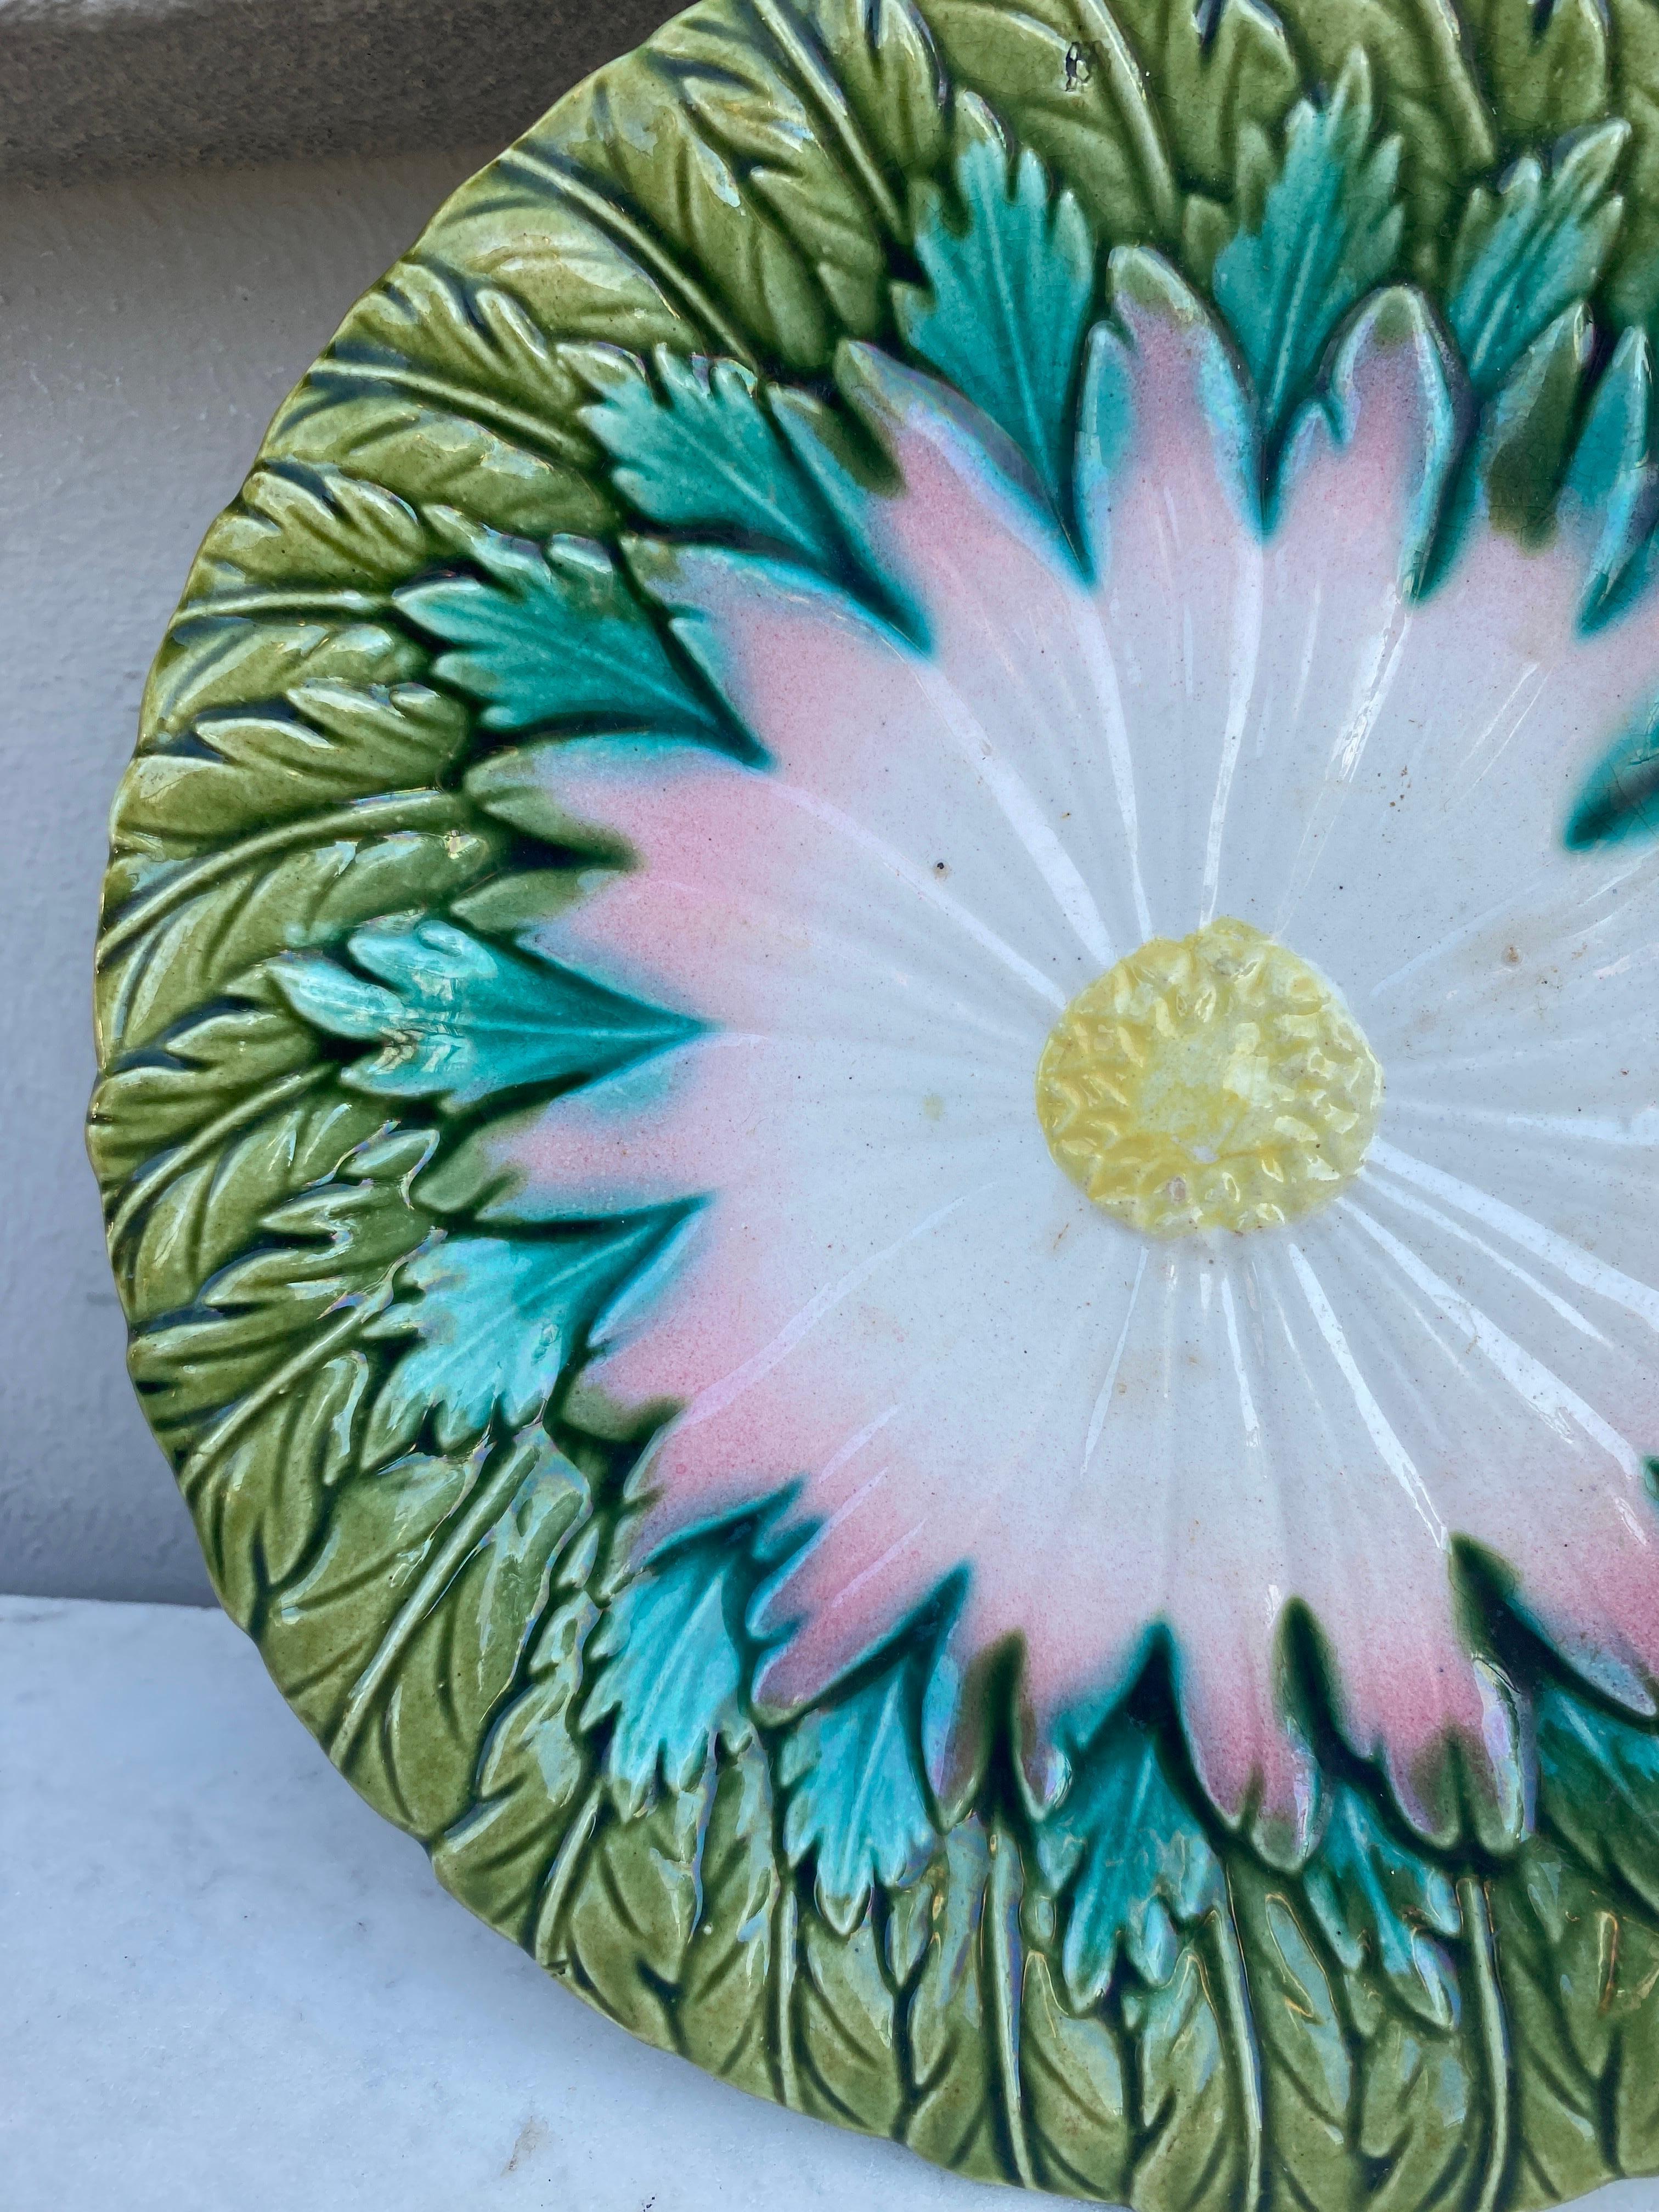 French Majolica daisy plate Orchies unsigned, circa 1890.